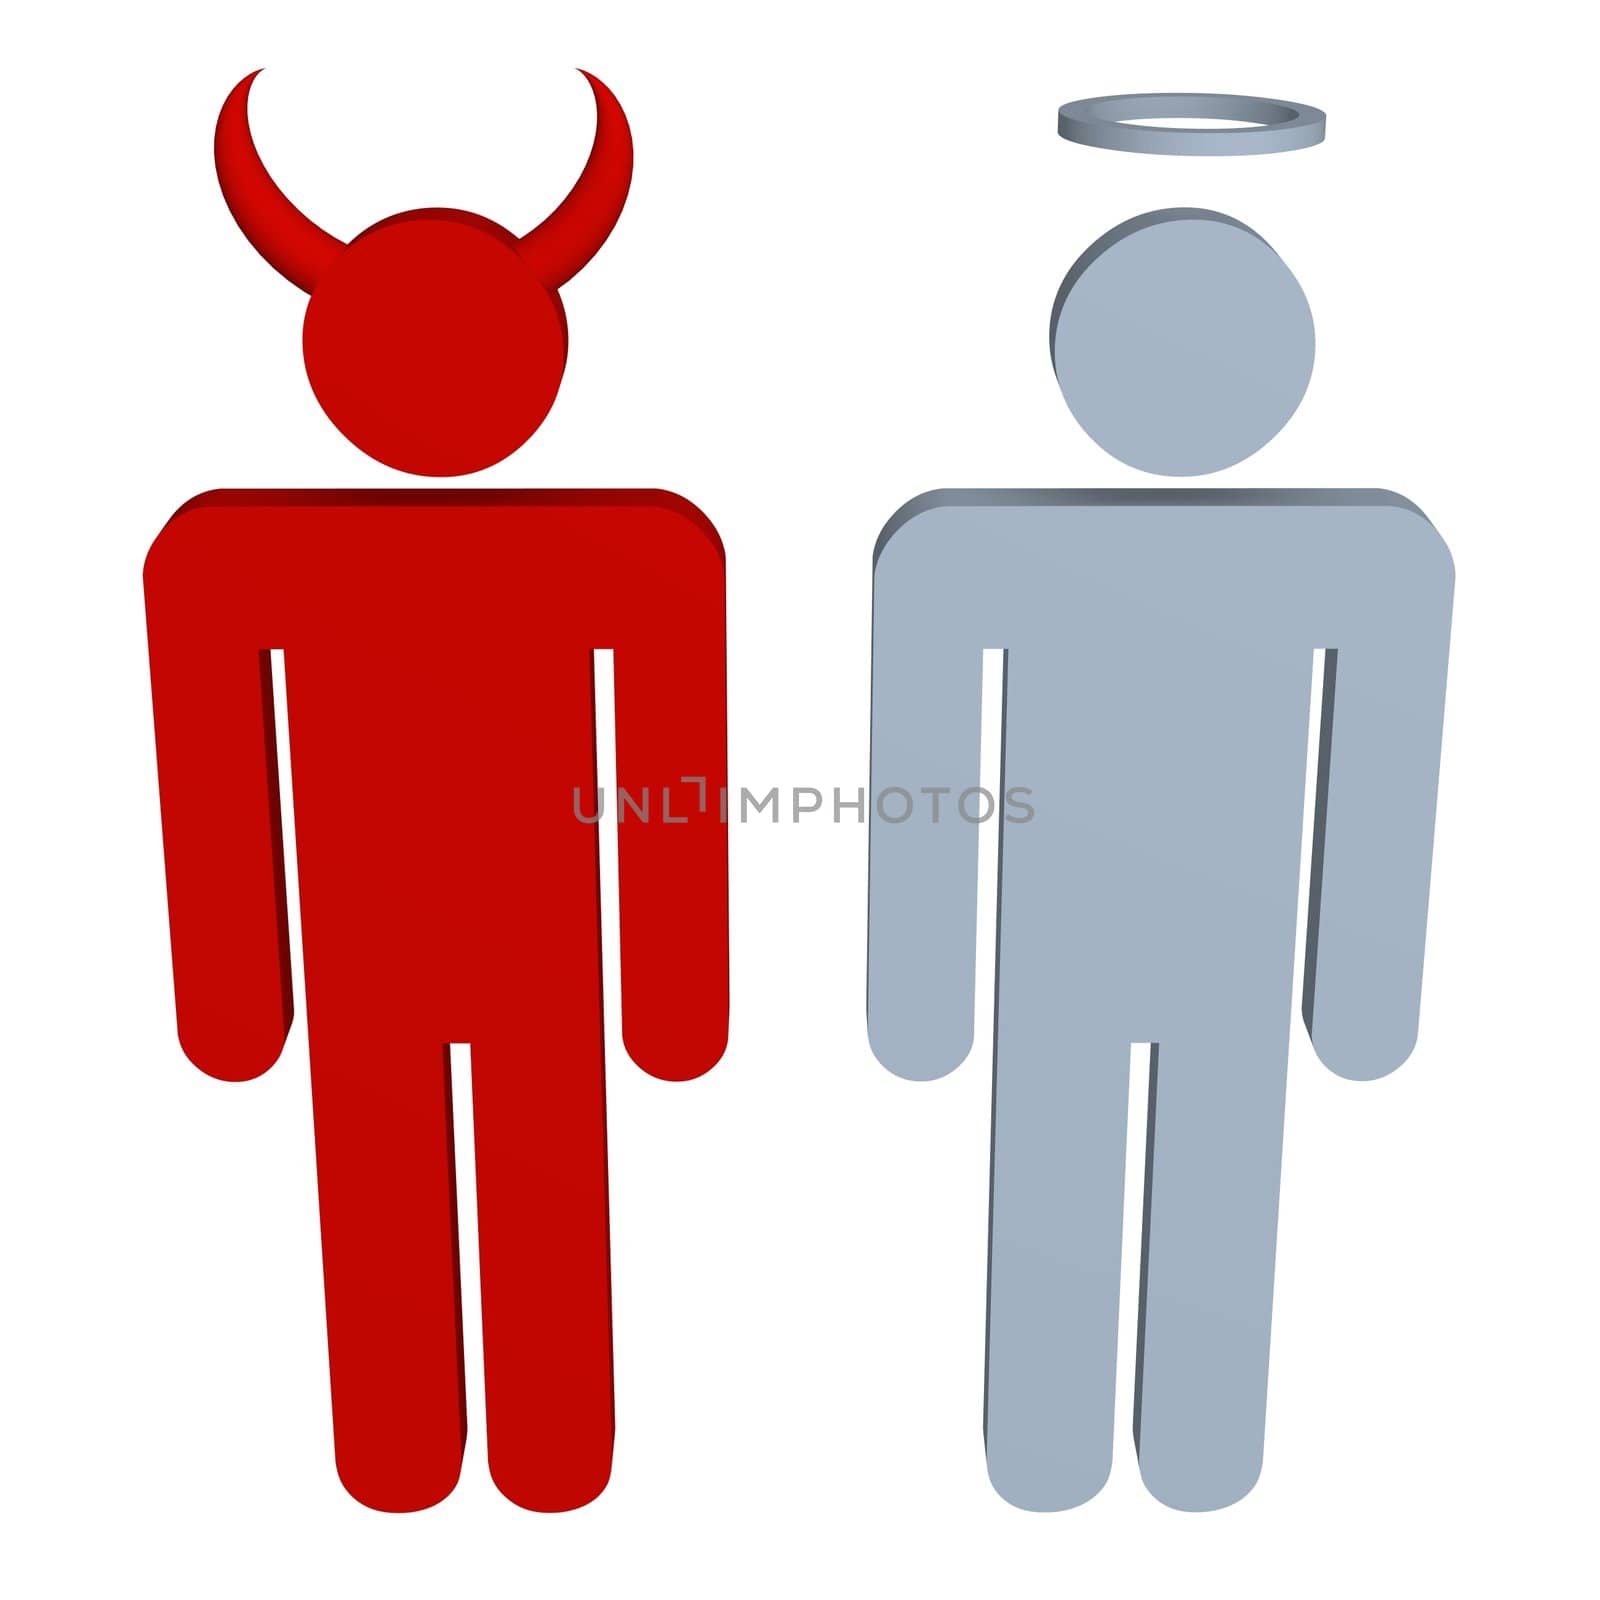 Illustration of two characters, One is red with horns and one is blue with a halo 